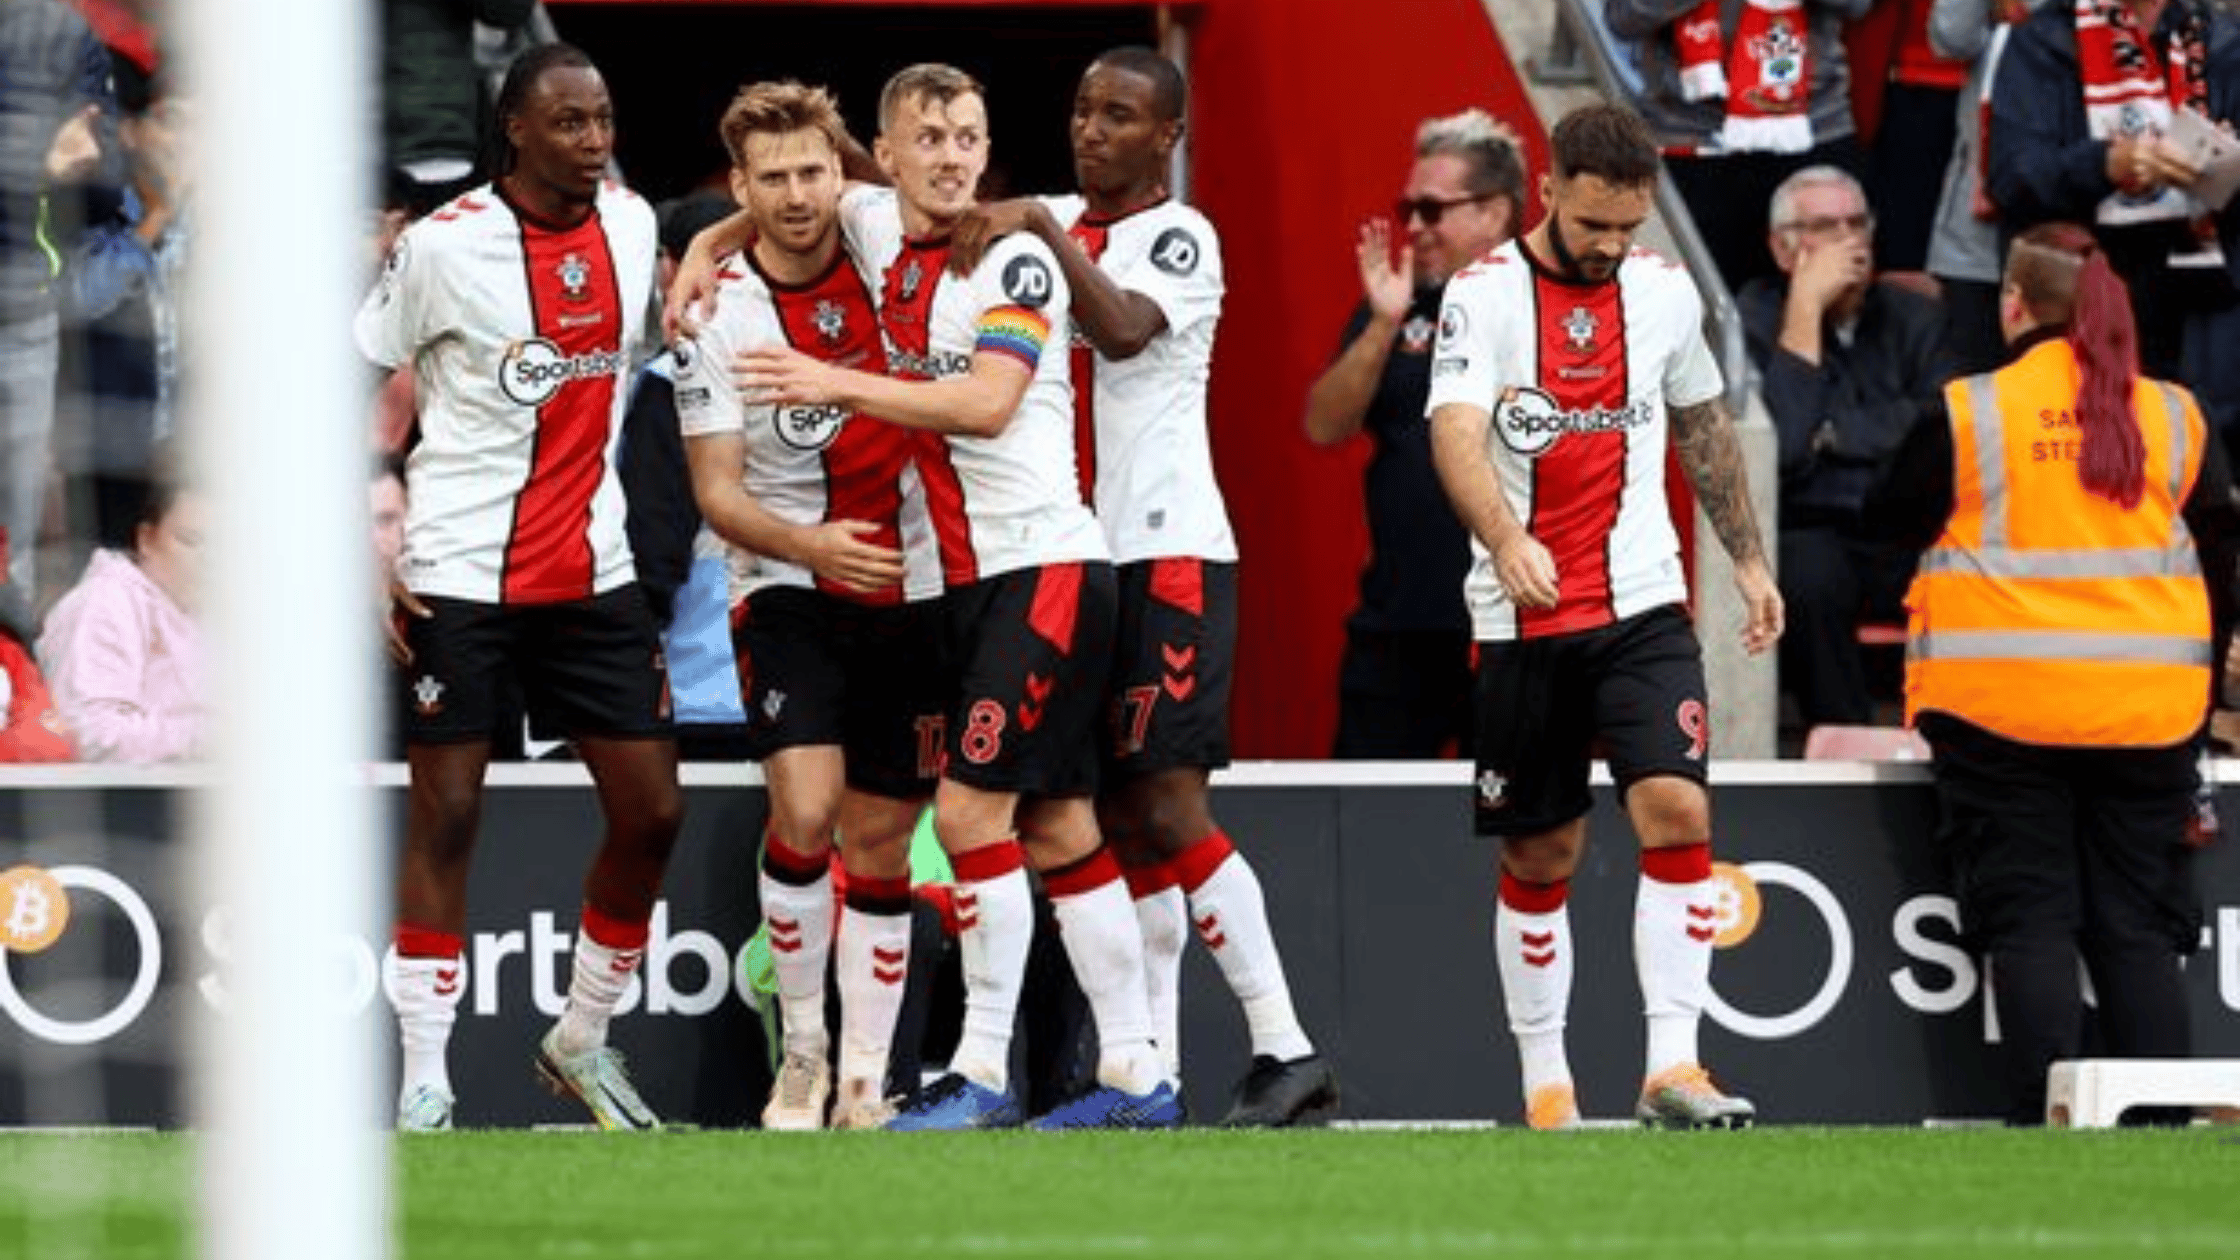 Southampton Vs Arsenal: Stuart Armstrong's Equalizer Earned The Saints A Hard-Earned Point Against Arsenal